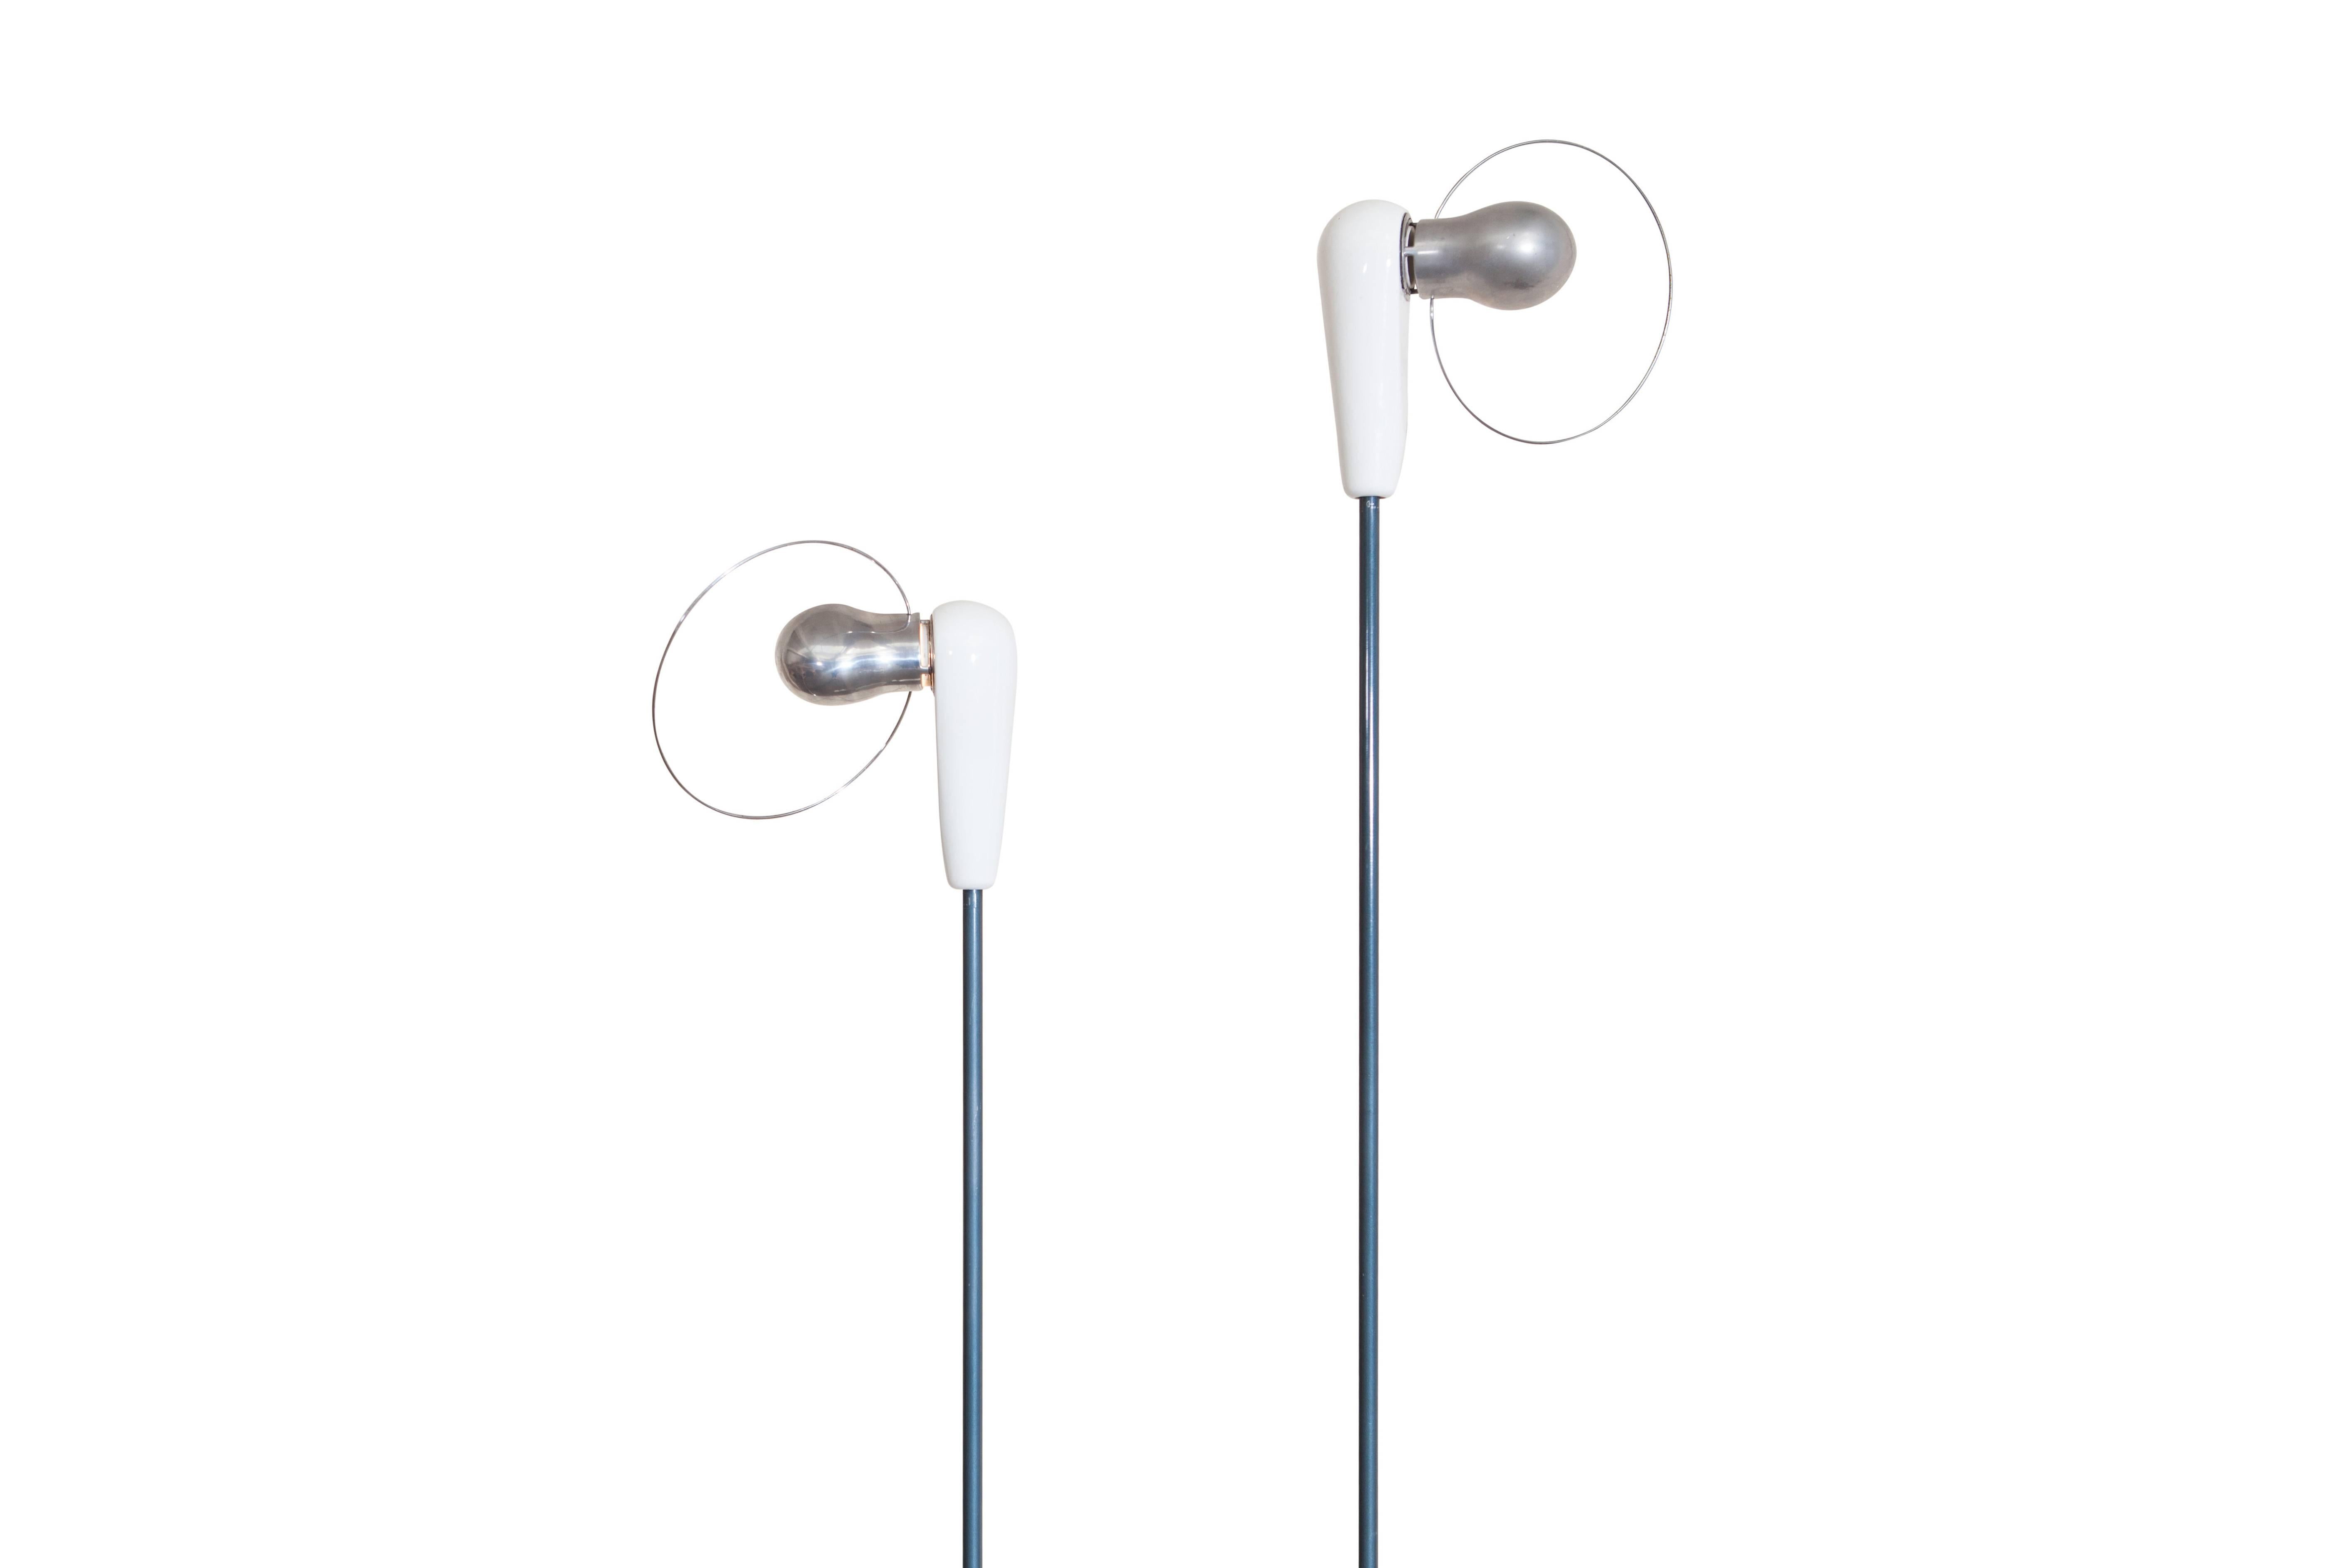 Castiglioni designed this pair of 'Bip Bip' floor lamps in Italy for Flos in 1976.

Made of ceramic, steel, varnish and aluminium.
Measures: Height 193 + height 215 cm, diameter 23 cm.
These are no longer in production.

                  